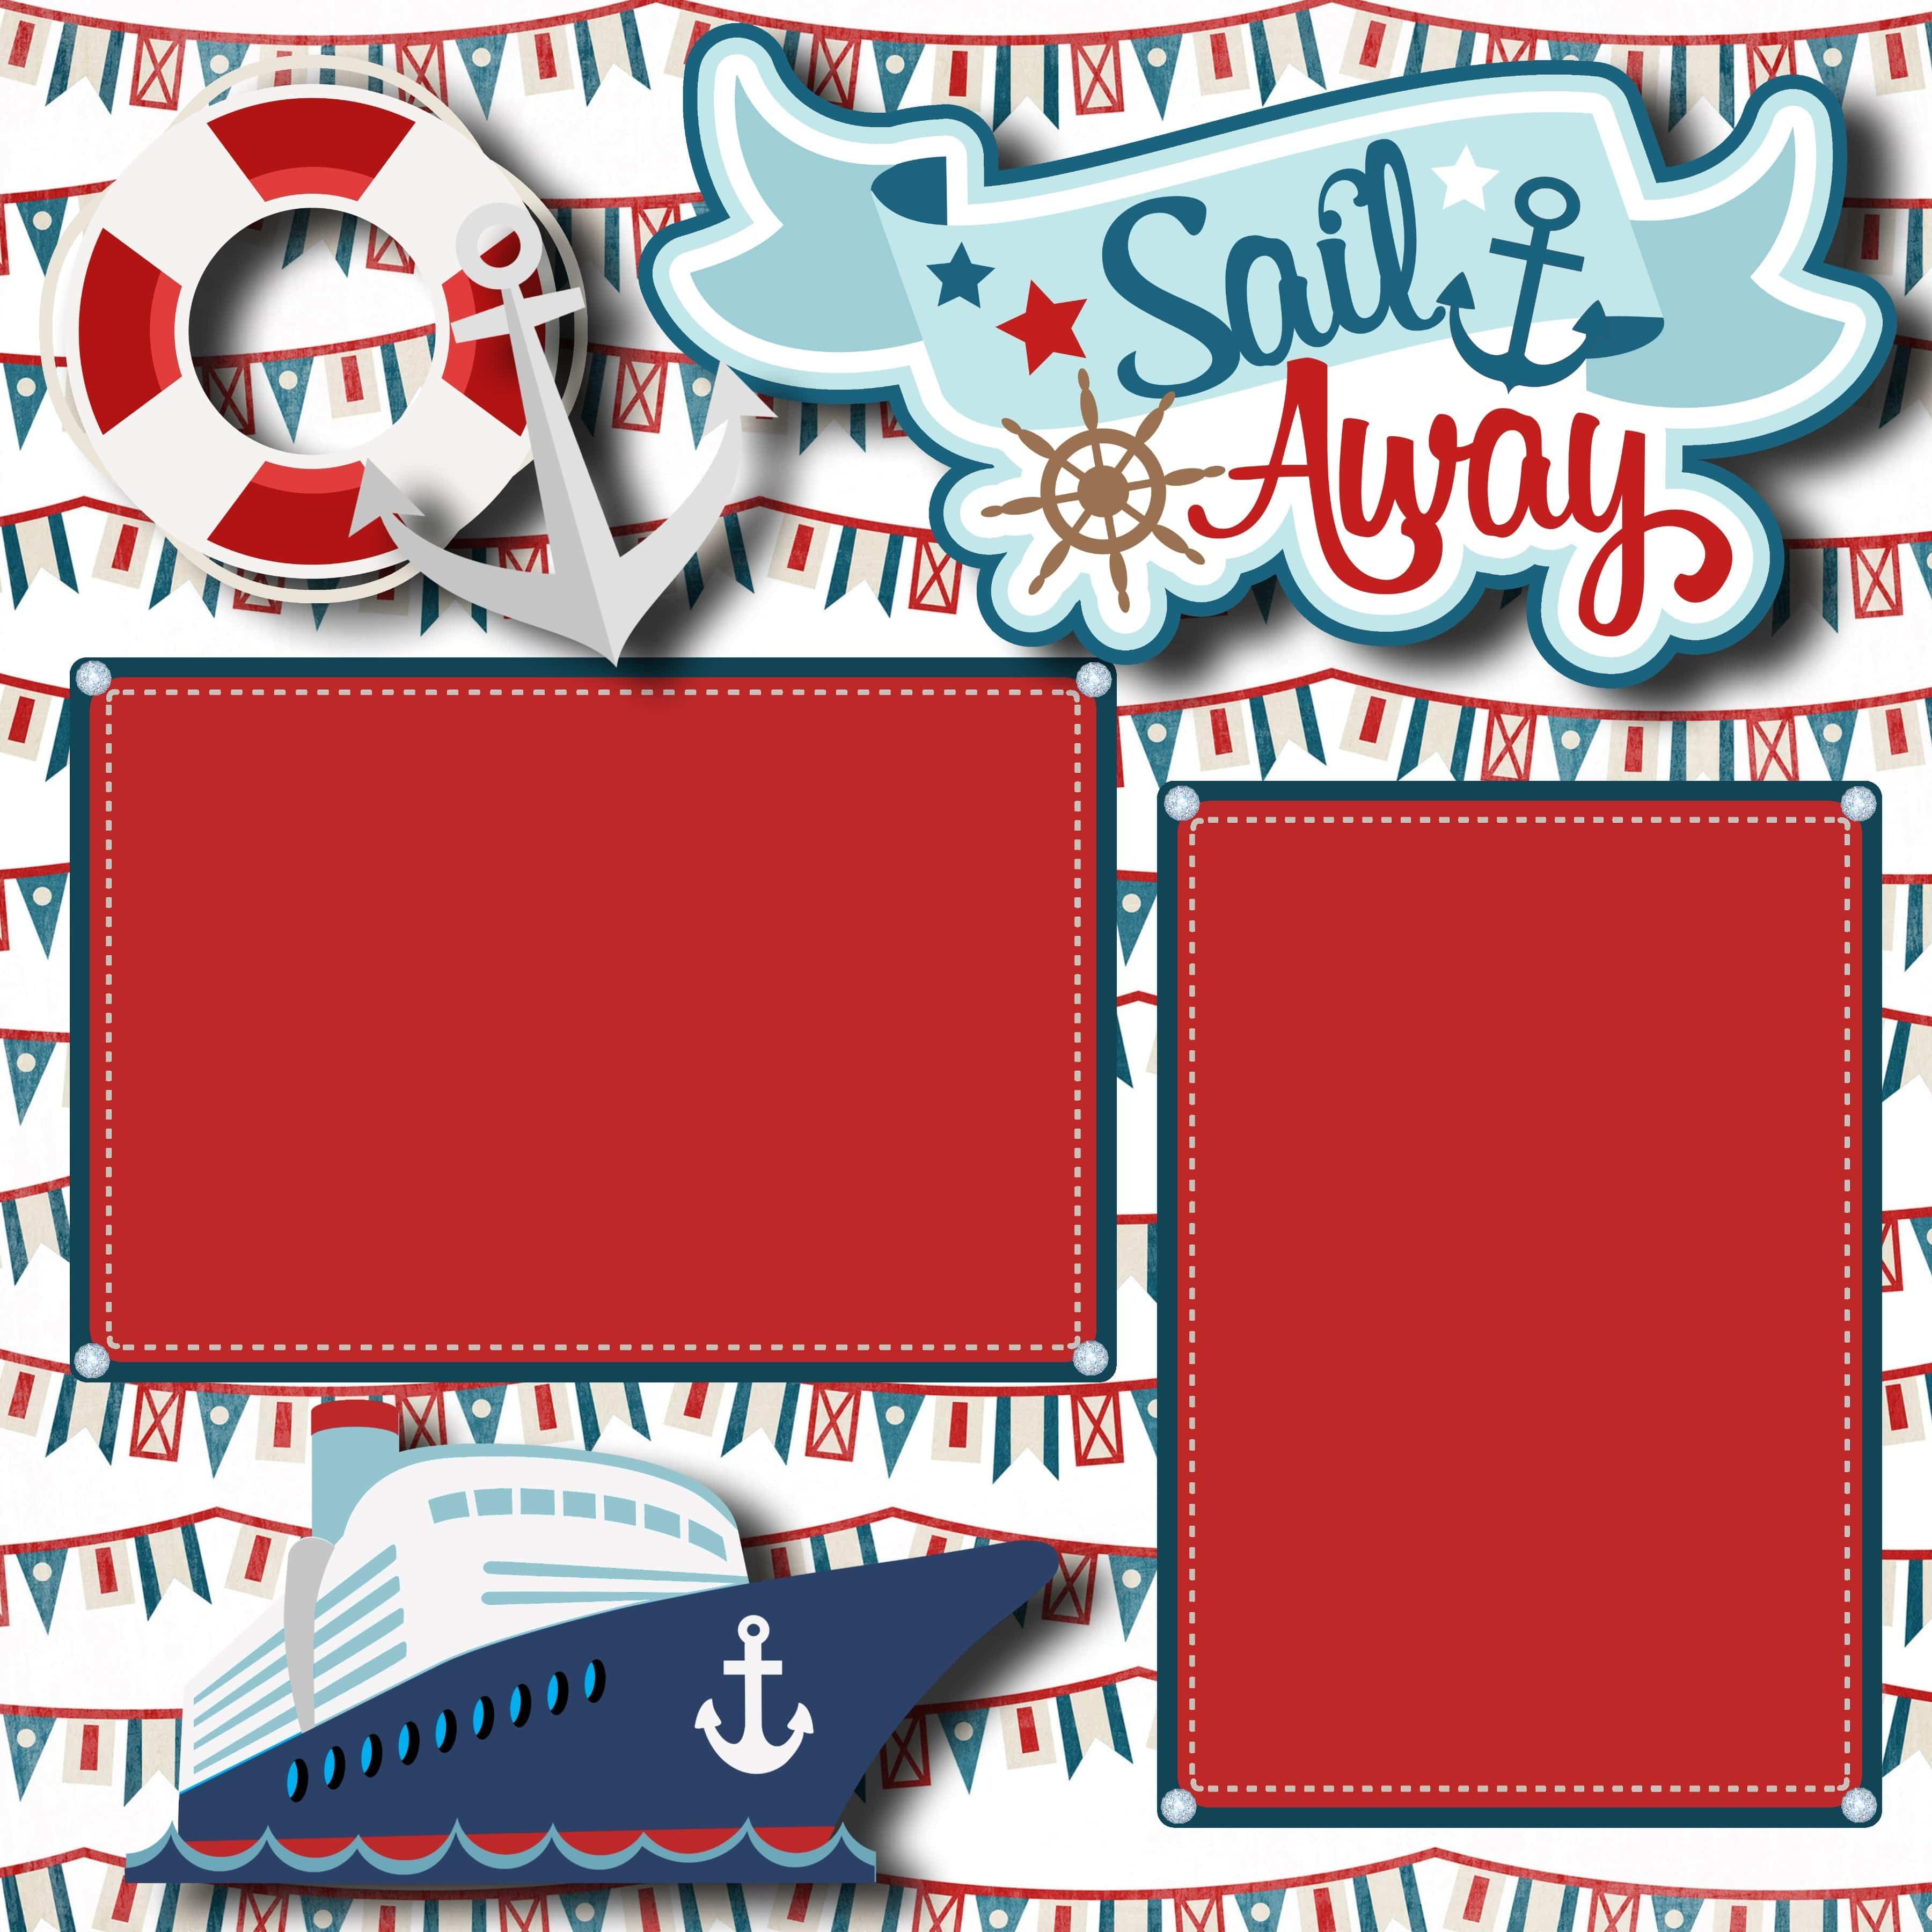 Sail Away (2) - 12 x 12 Premade, Printed Scrapbook Pages by SSC Designs - Scrapbook Supply Companies